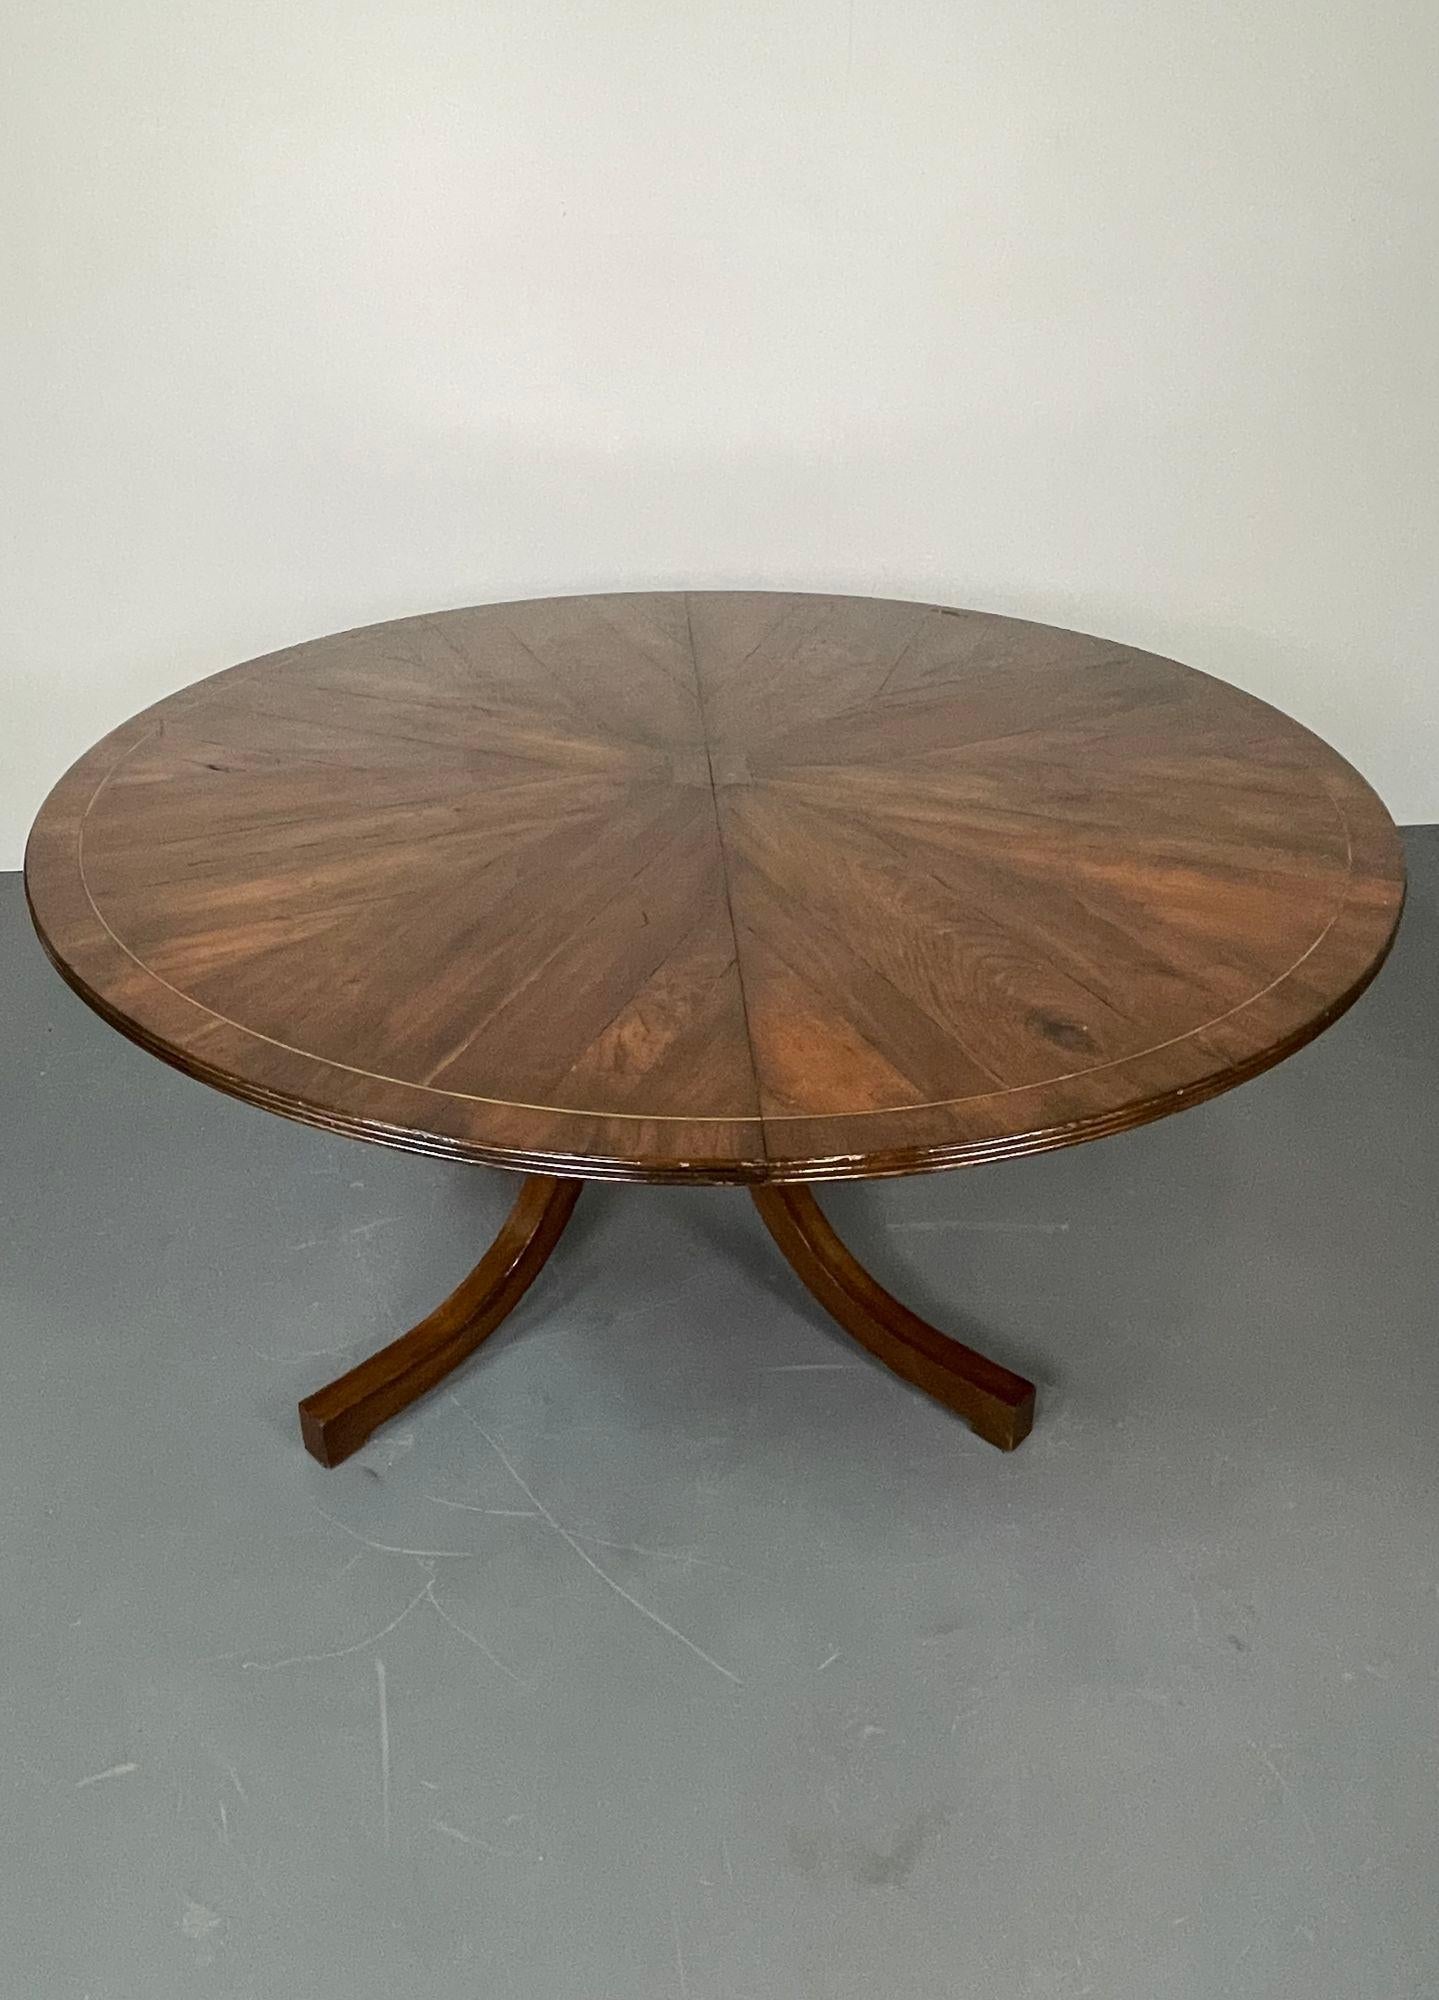 French Provincial Holly Hunt Split C-Leg Rustic Dining Table, Circular, Brass Inlays